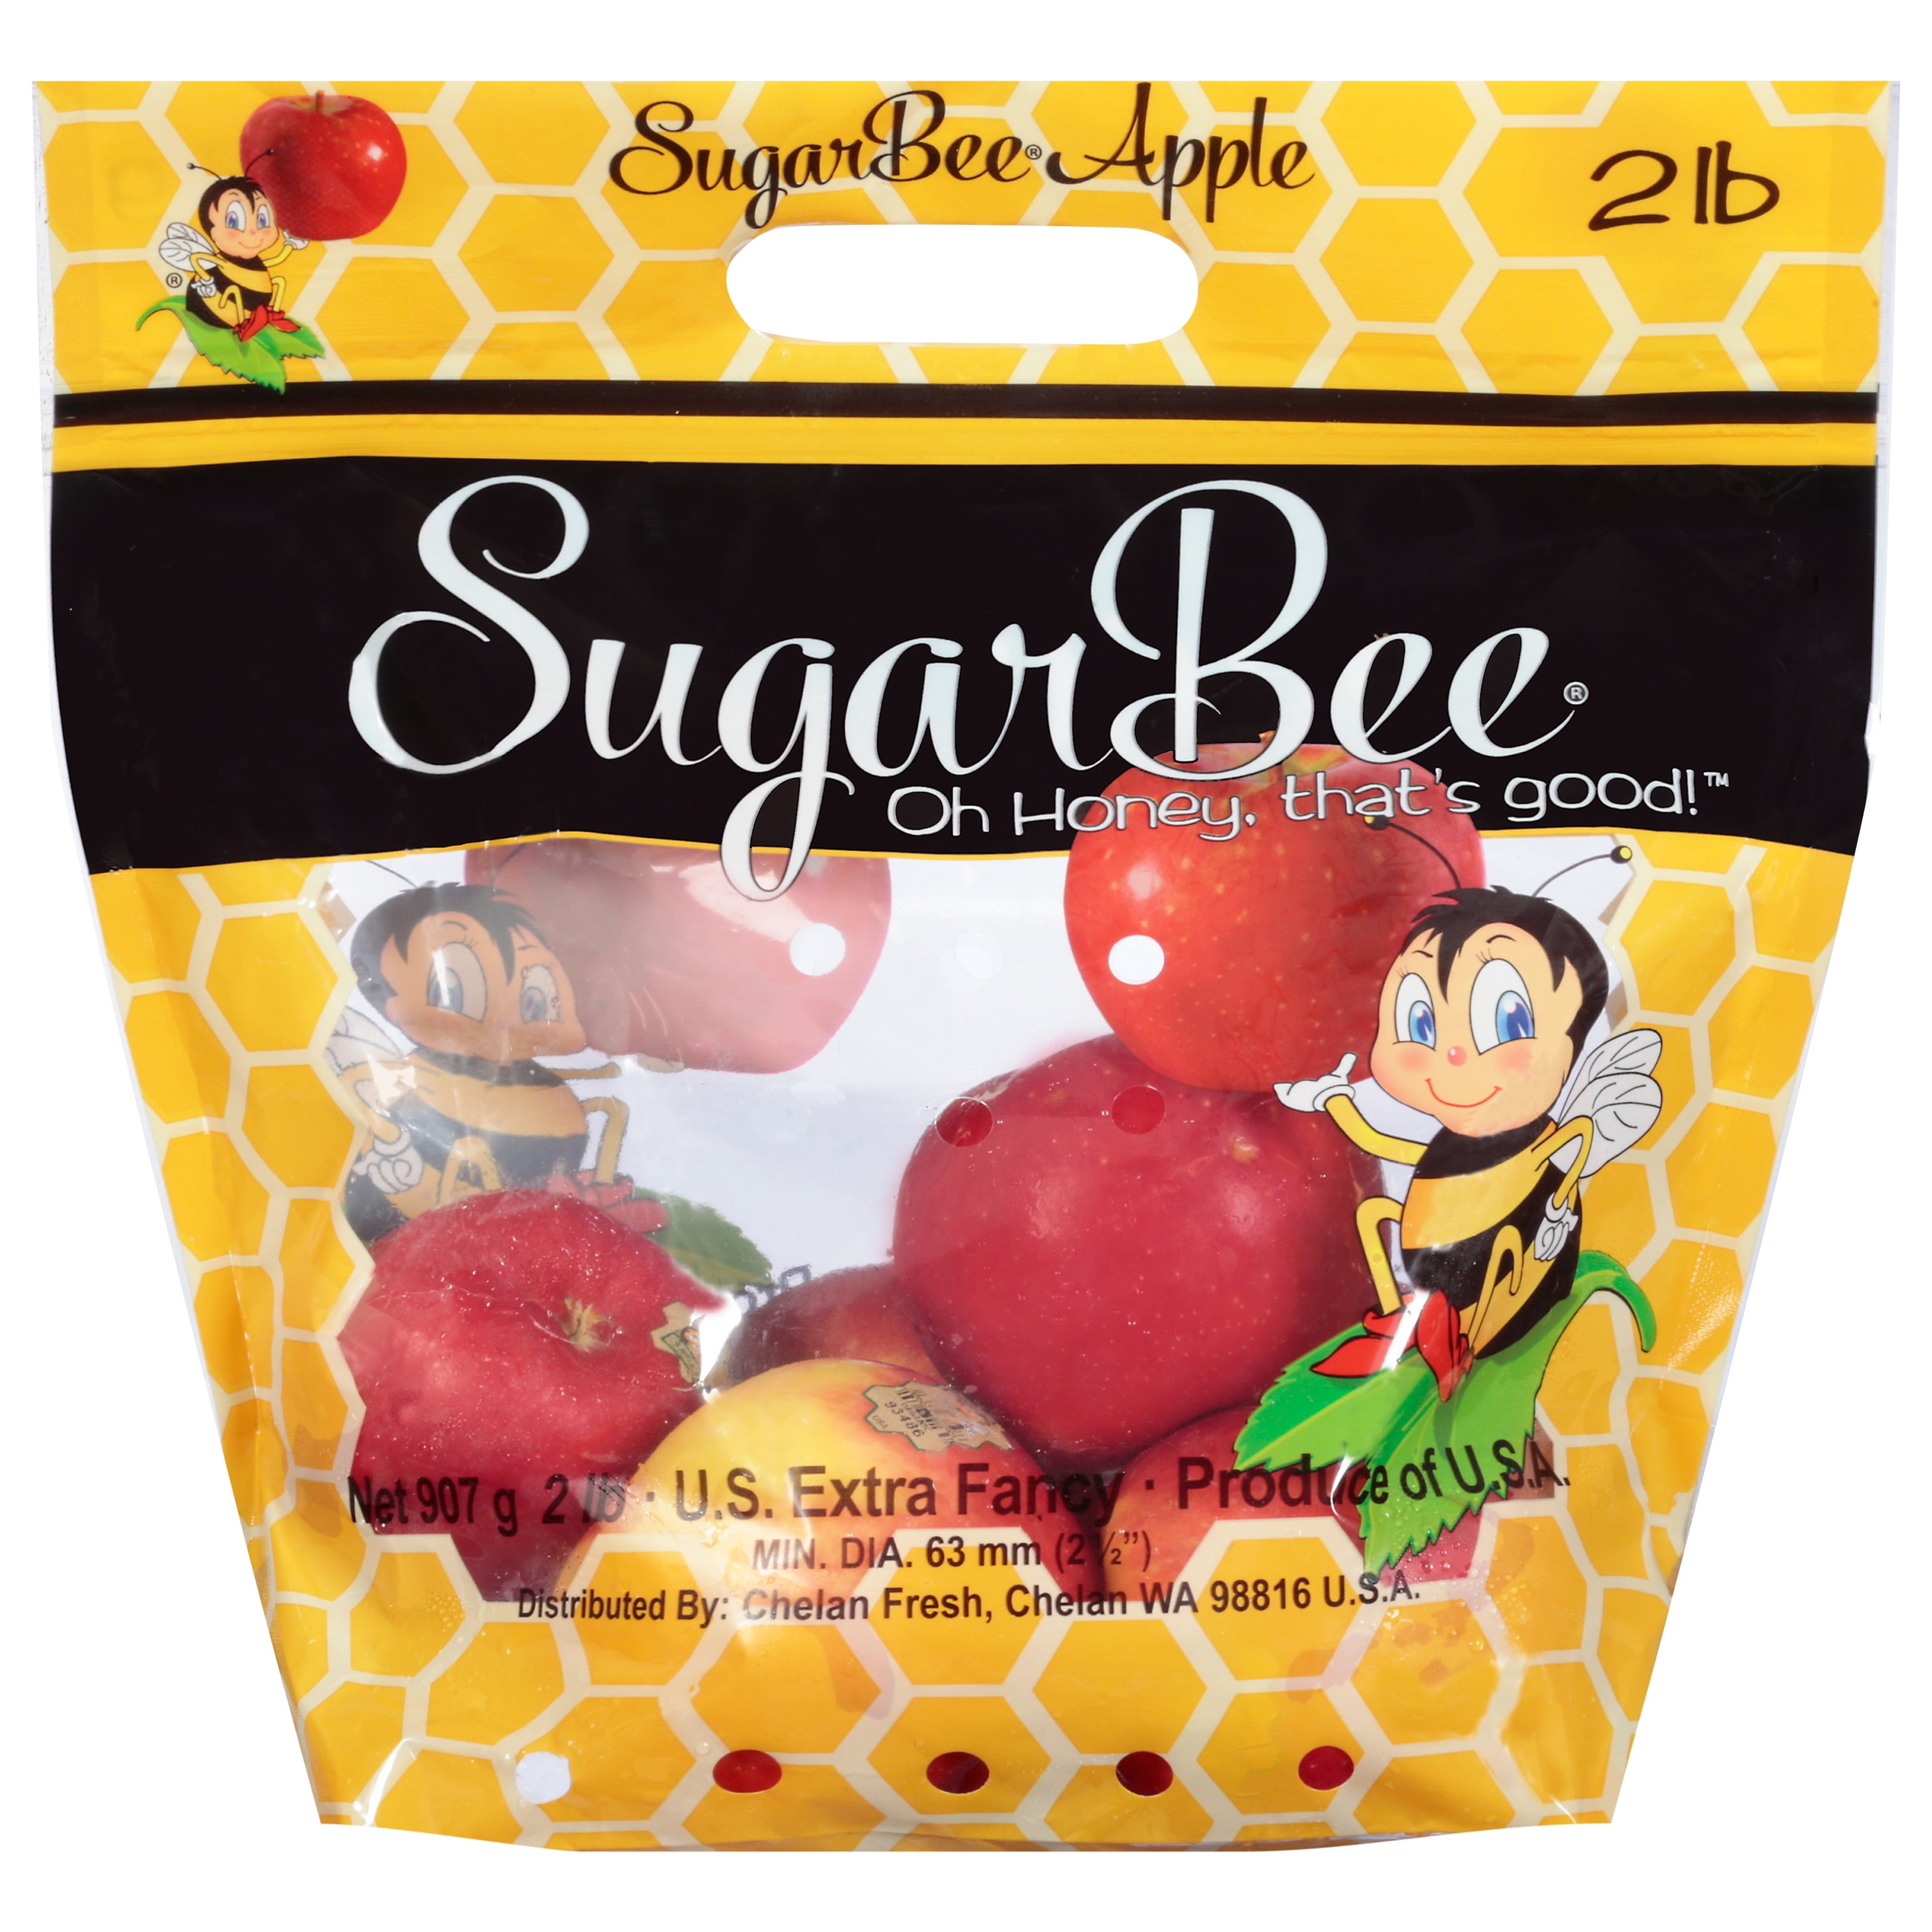 SugarBee apples to be sold jointly with powerful new partnership